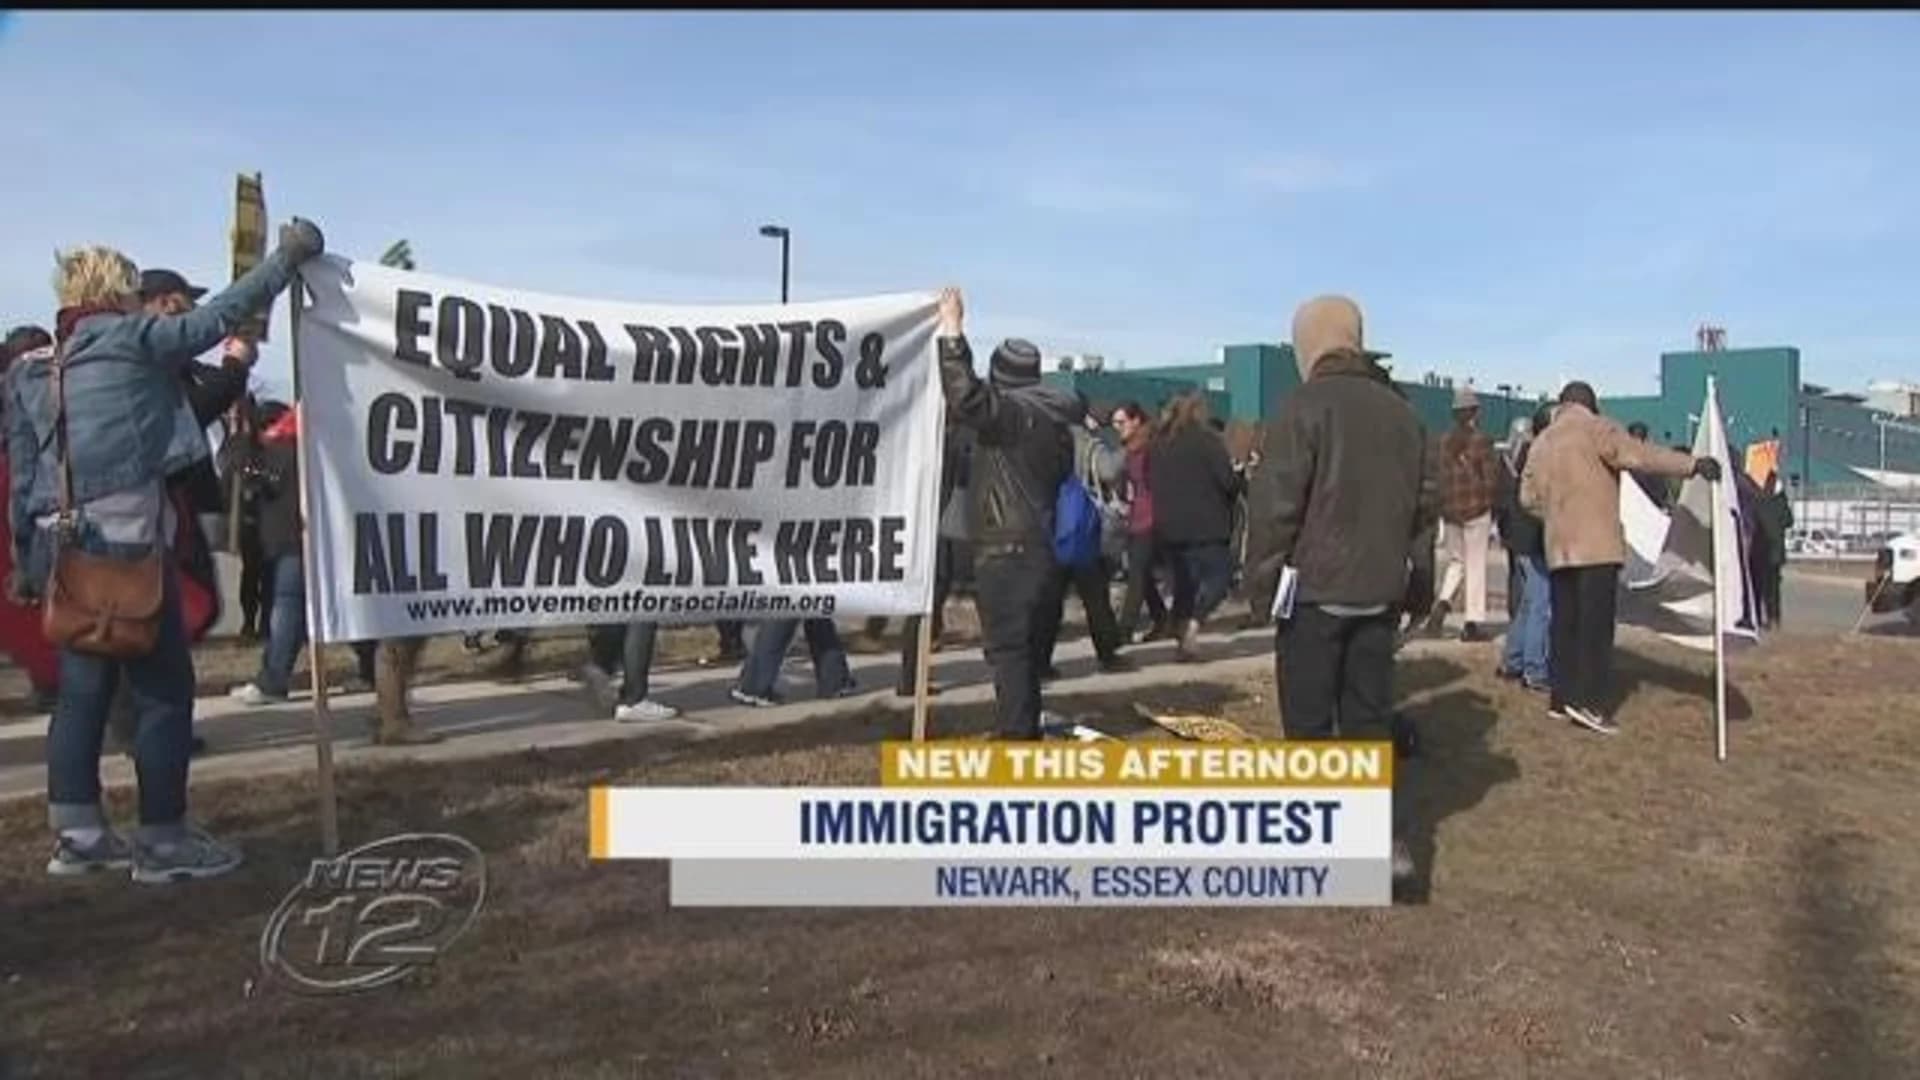 Coalition protests jailing of immigrants in Newark